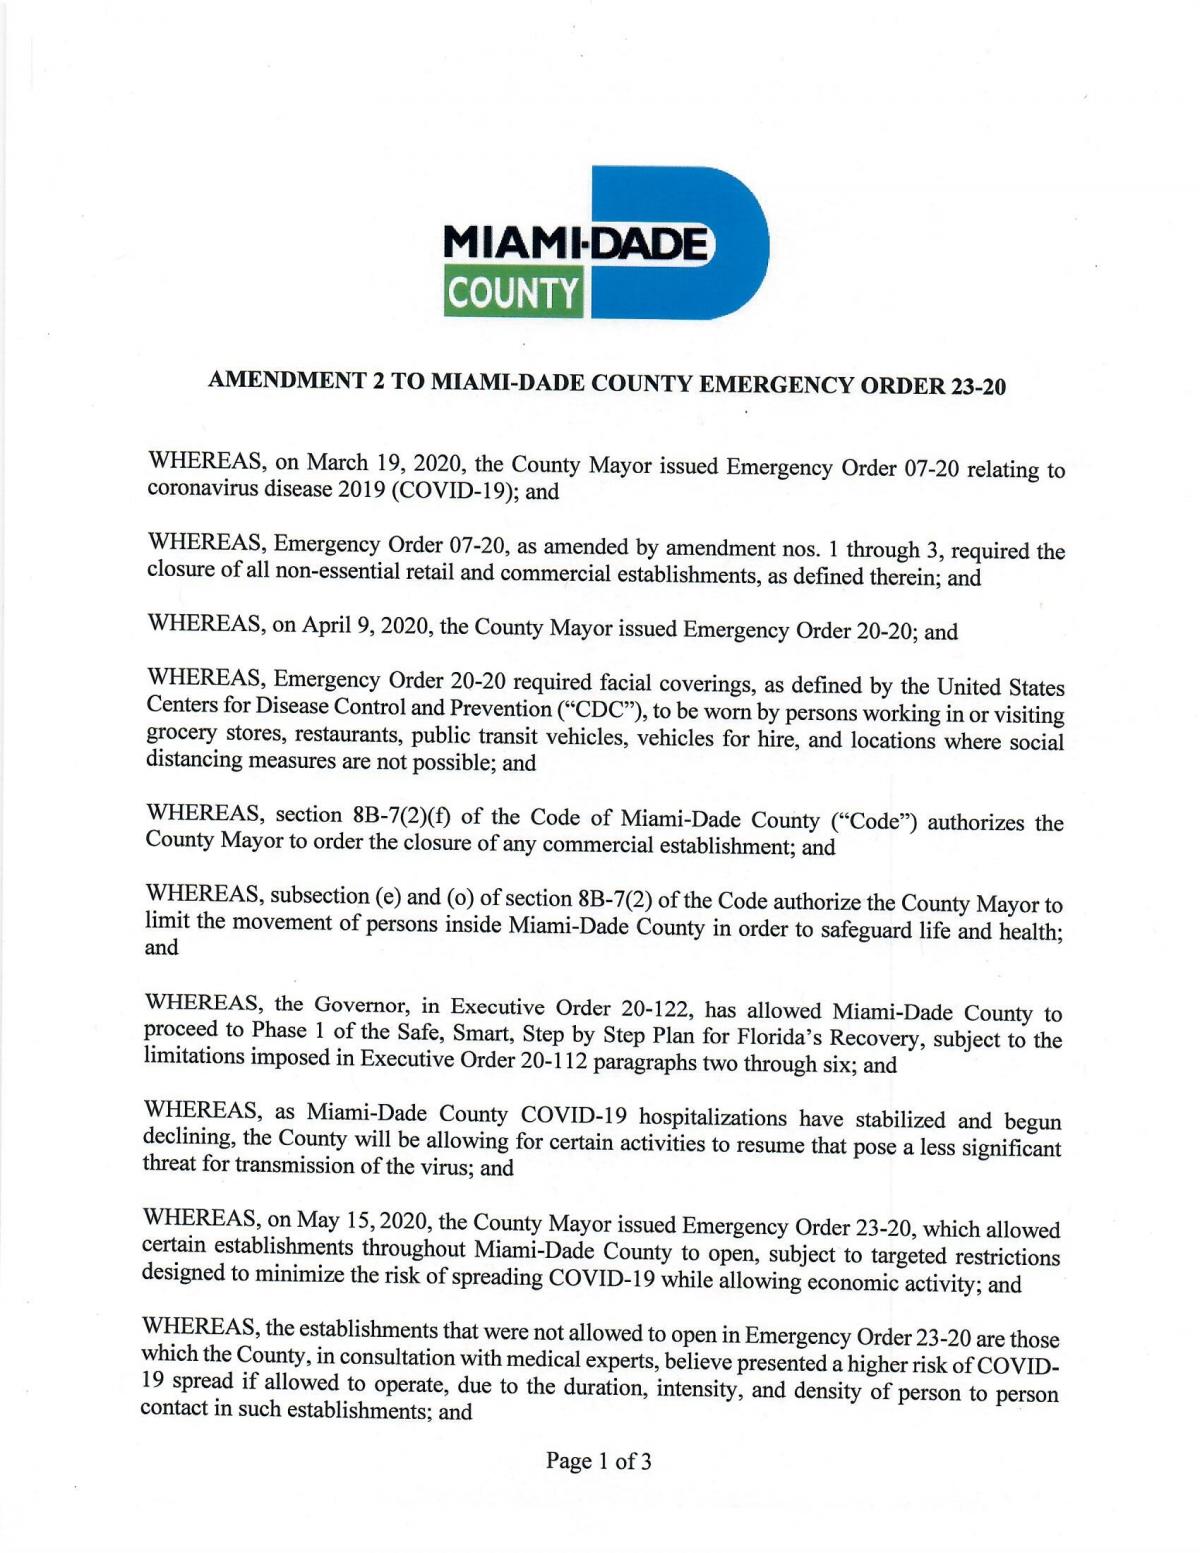 Miami-Dade County has just issued Amendment #2 to Order 23-20, as well as Amendment #2 to Order 21-20